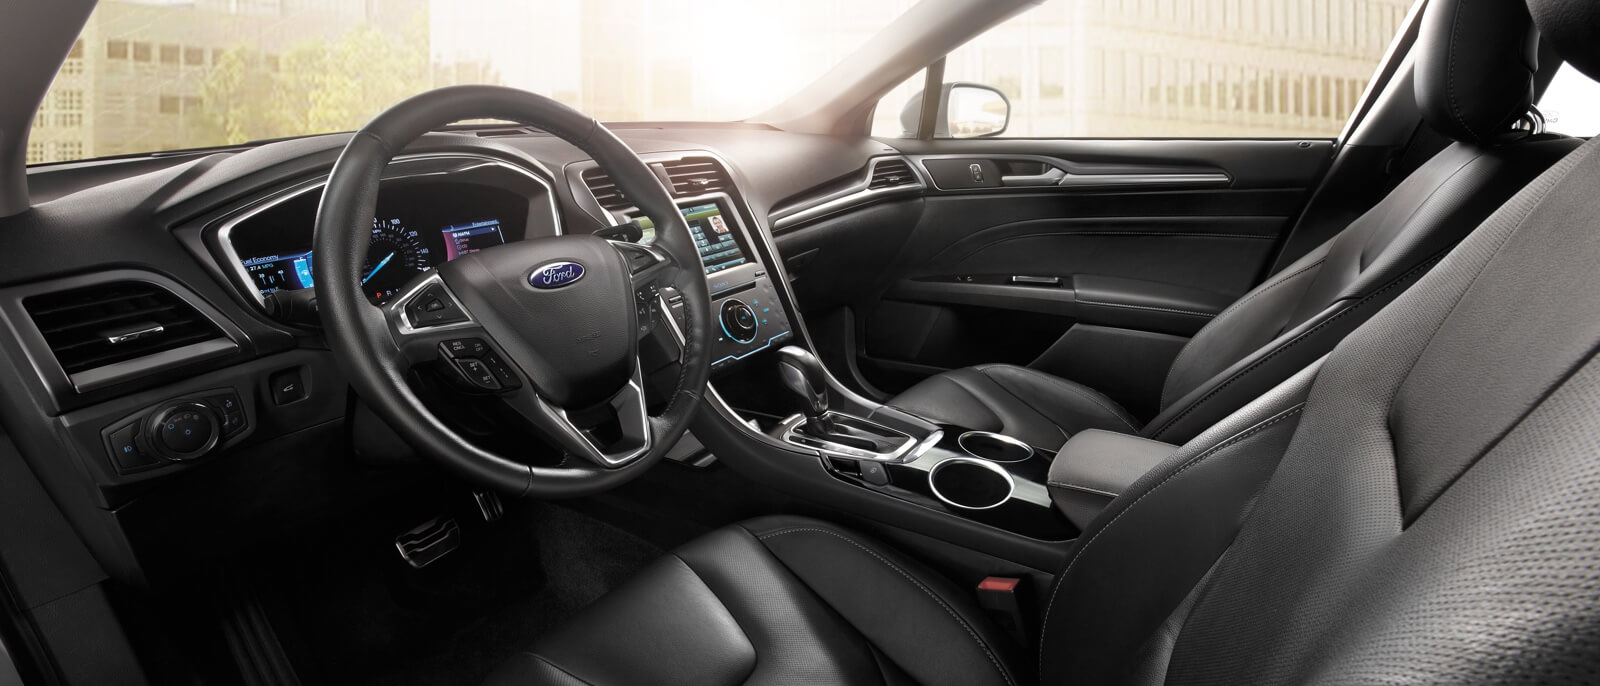 Ford Fusion Hybrid Model Info | River View Ford Oswego, IL